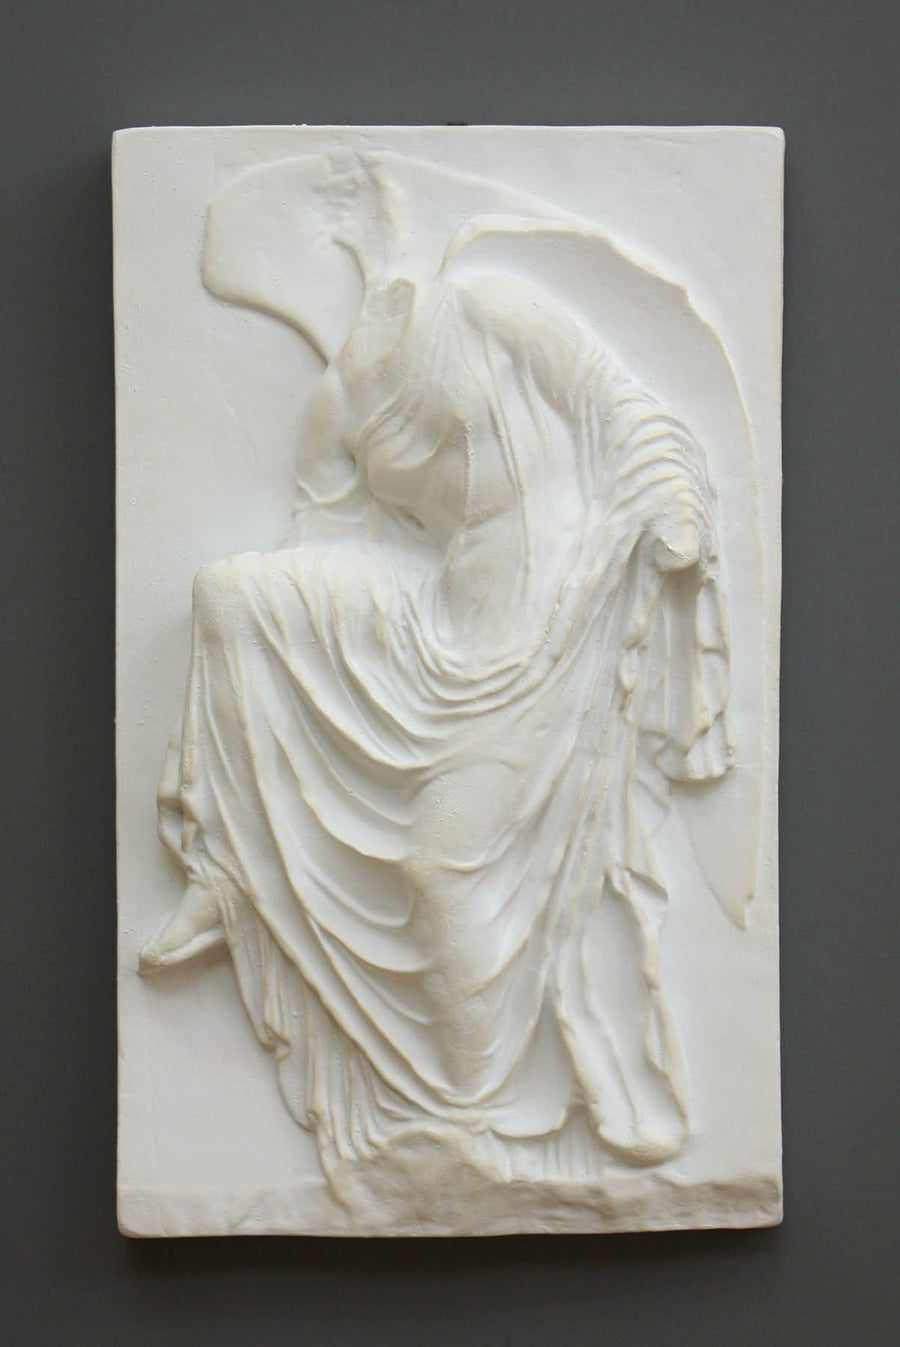 photo of cast of sculpture relief of robed figure, head now missing, reaching for her sandal on a dark gray background